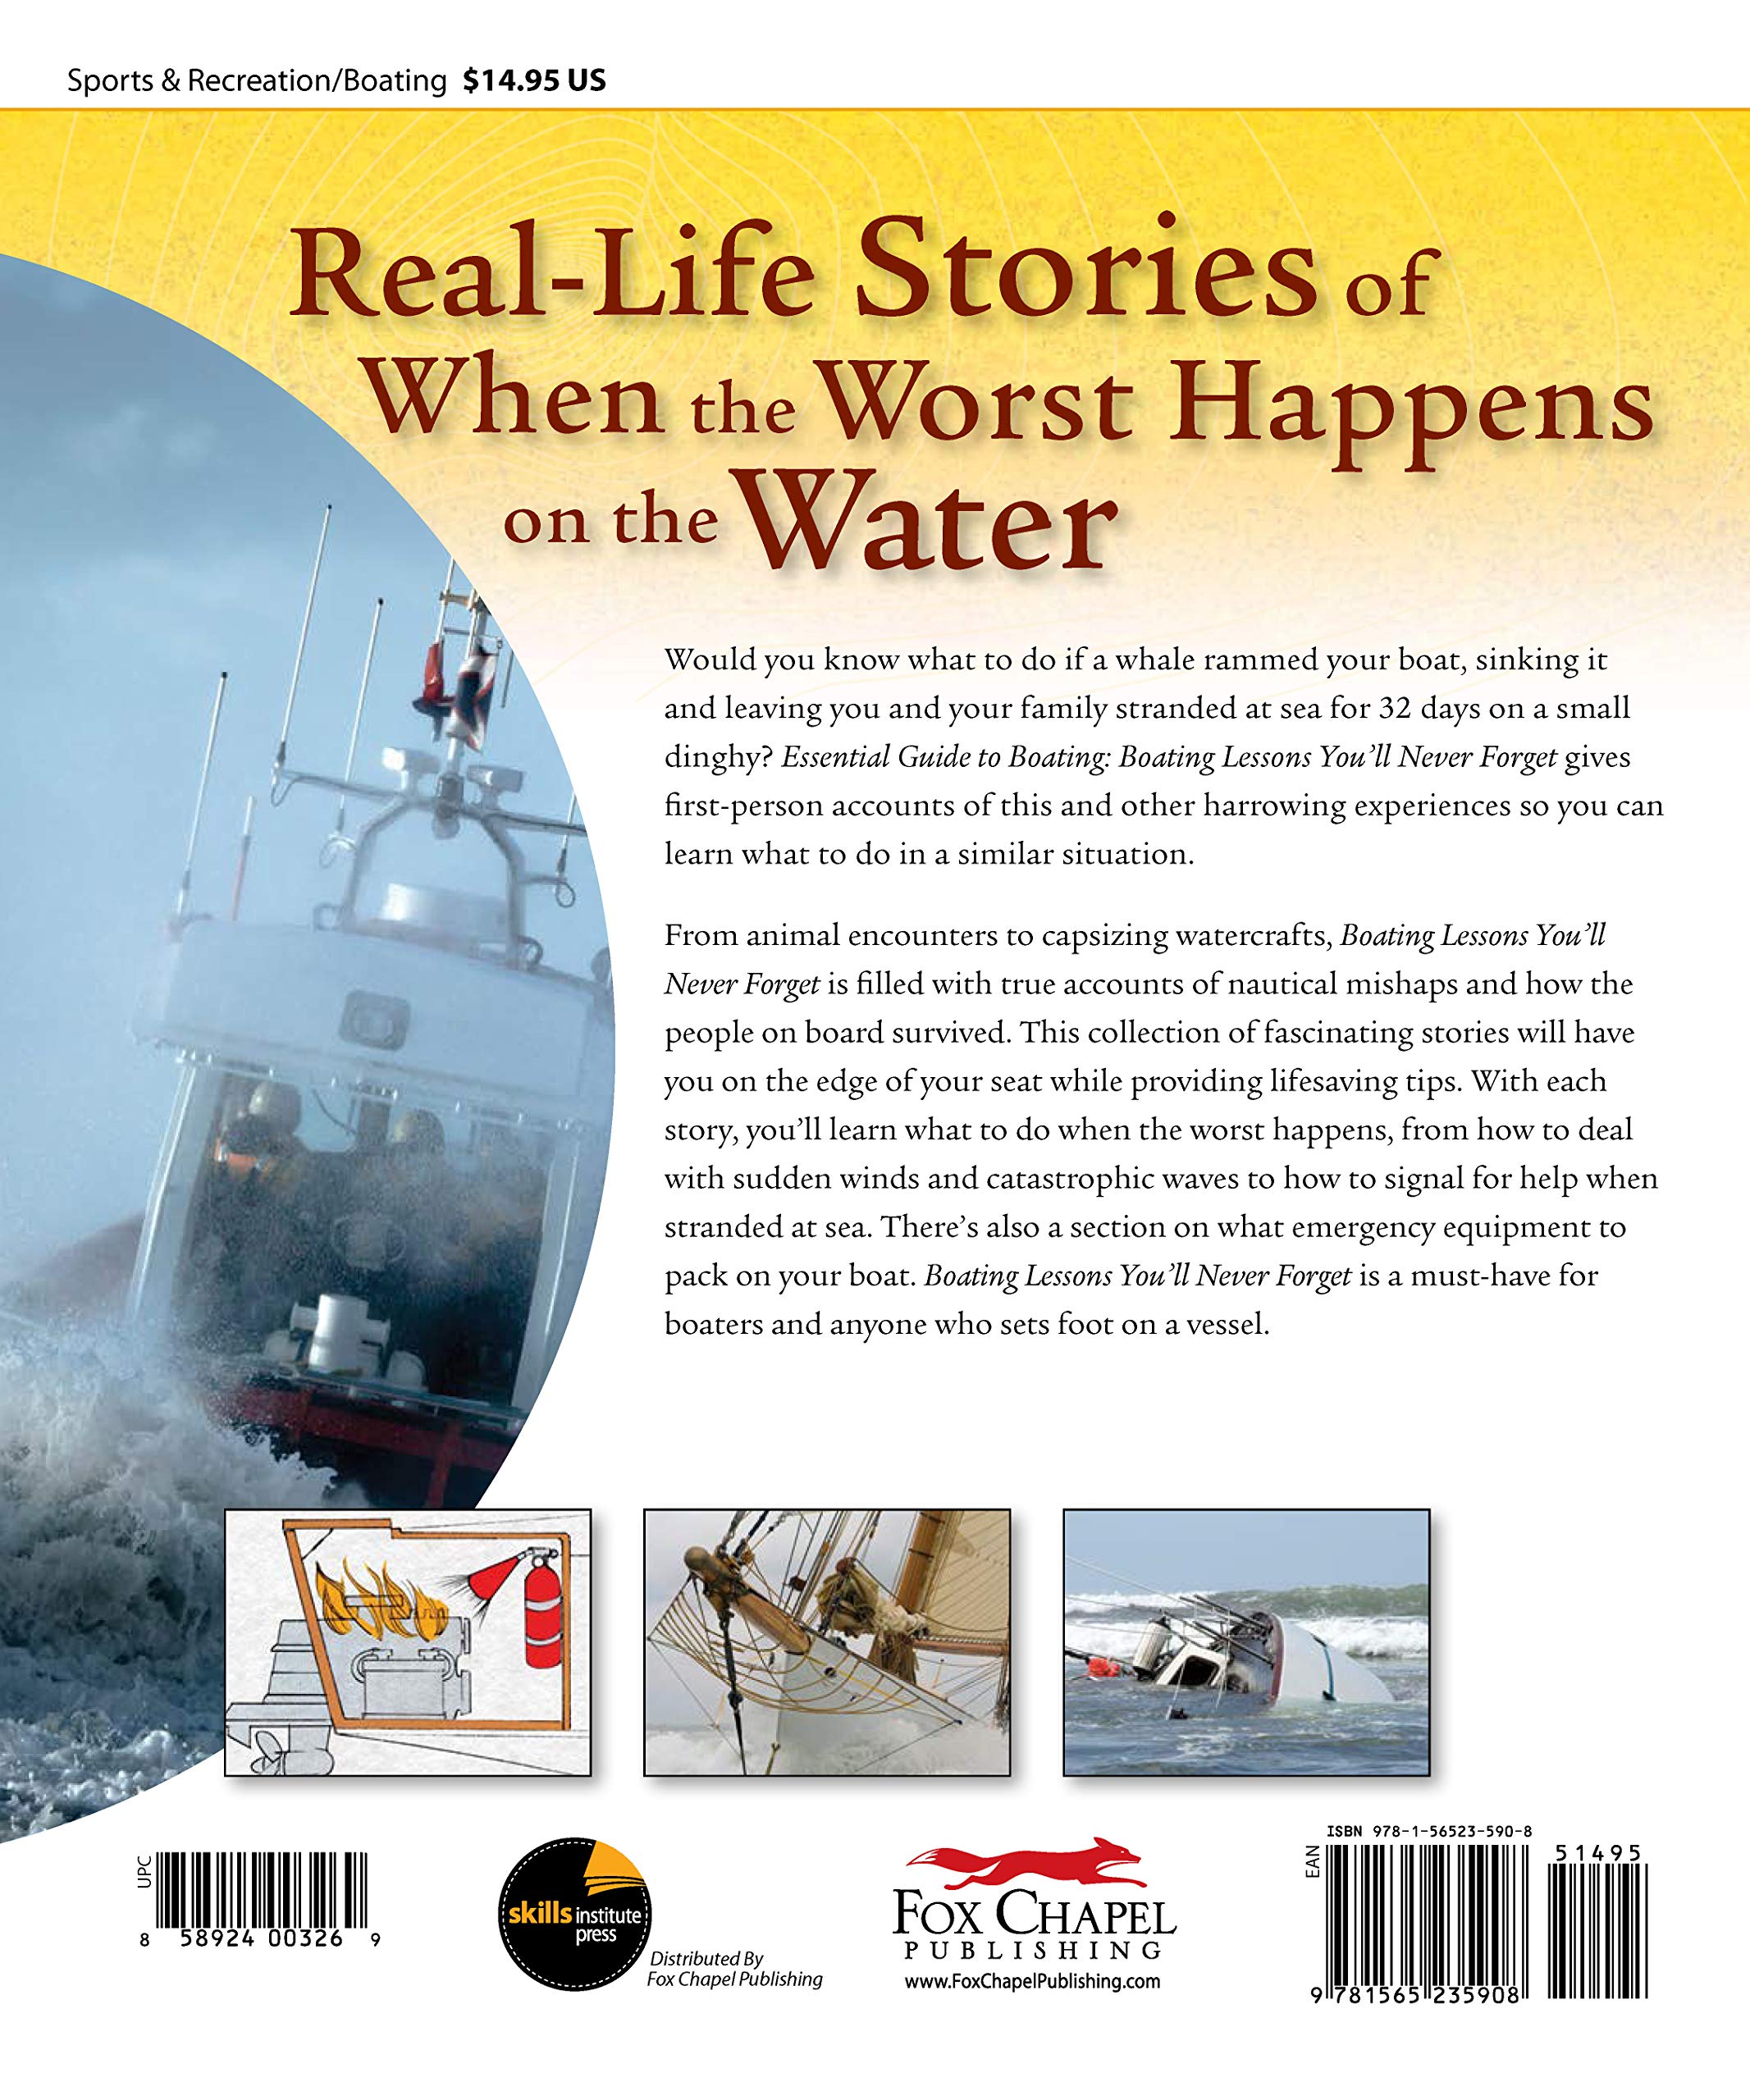 Boating Lessons You'll Never Forget: Safety, Emergency and Survival Techniques from Real-Life Disaster Stories (Fox Chapel Publishing) Avoiding Rocks, Bad Weather, & More (Essential Guide to Boating)